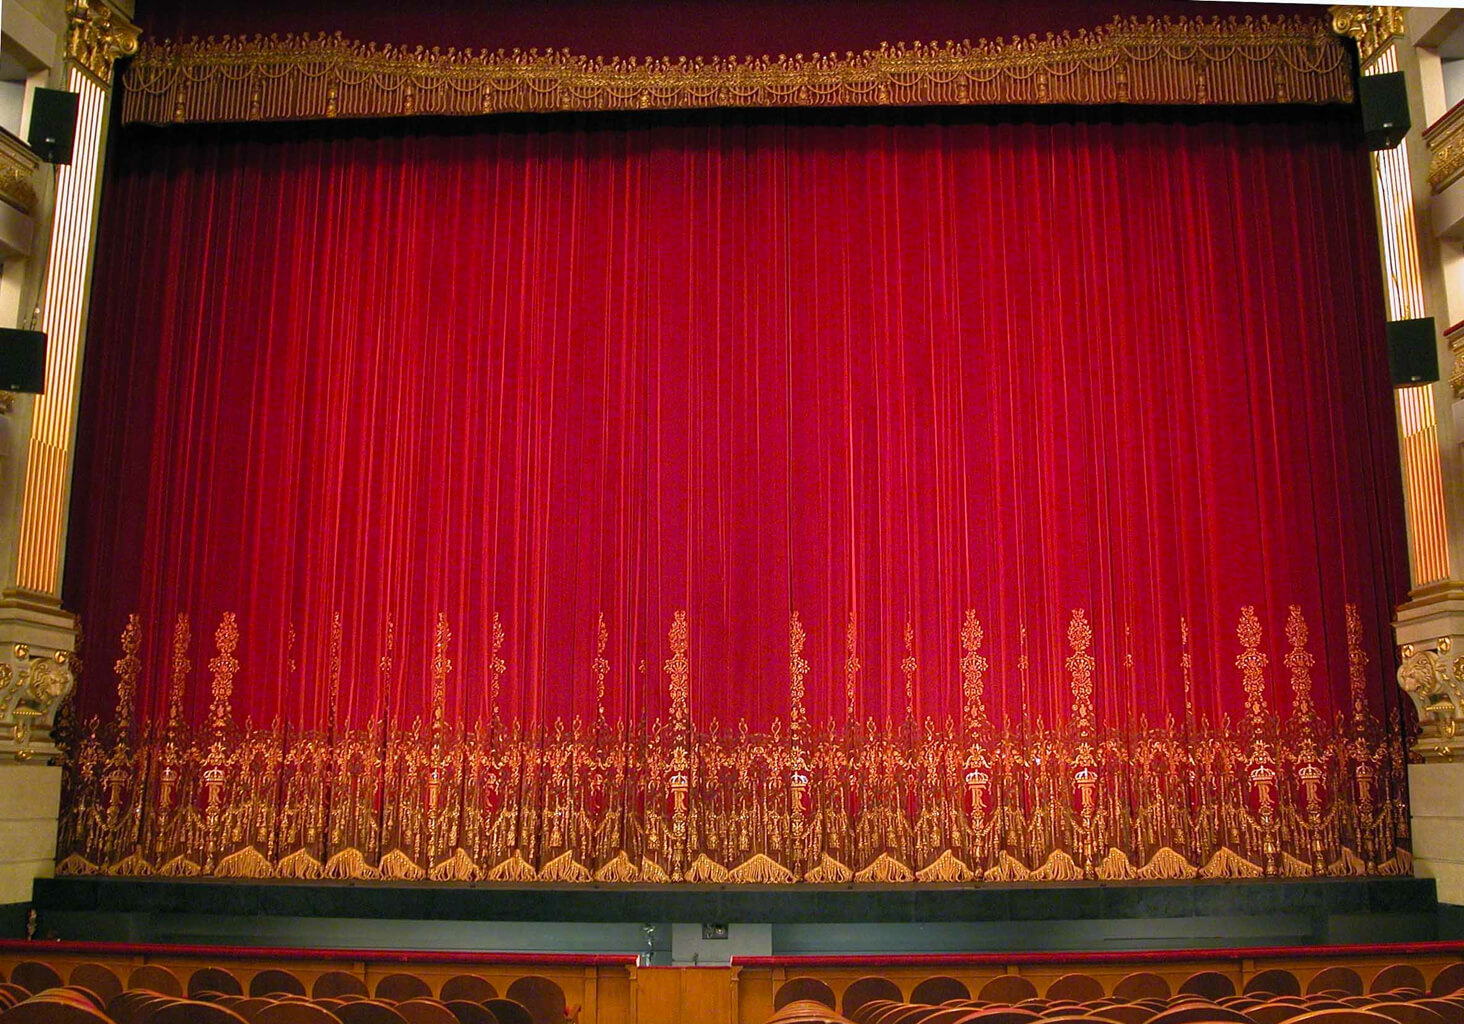 The drop curtain at Teatro Real